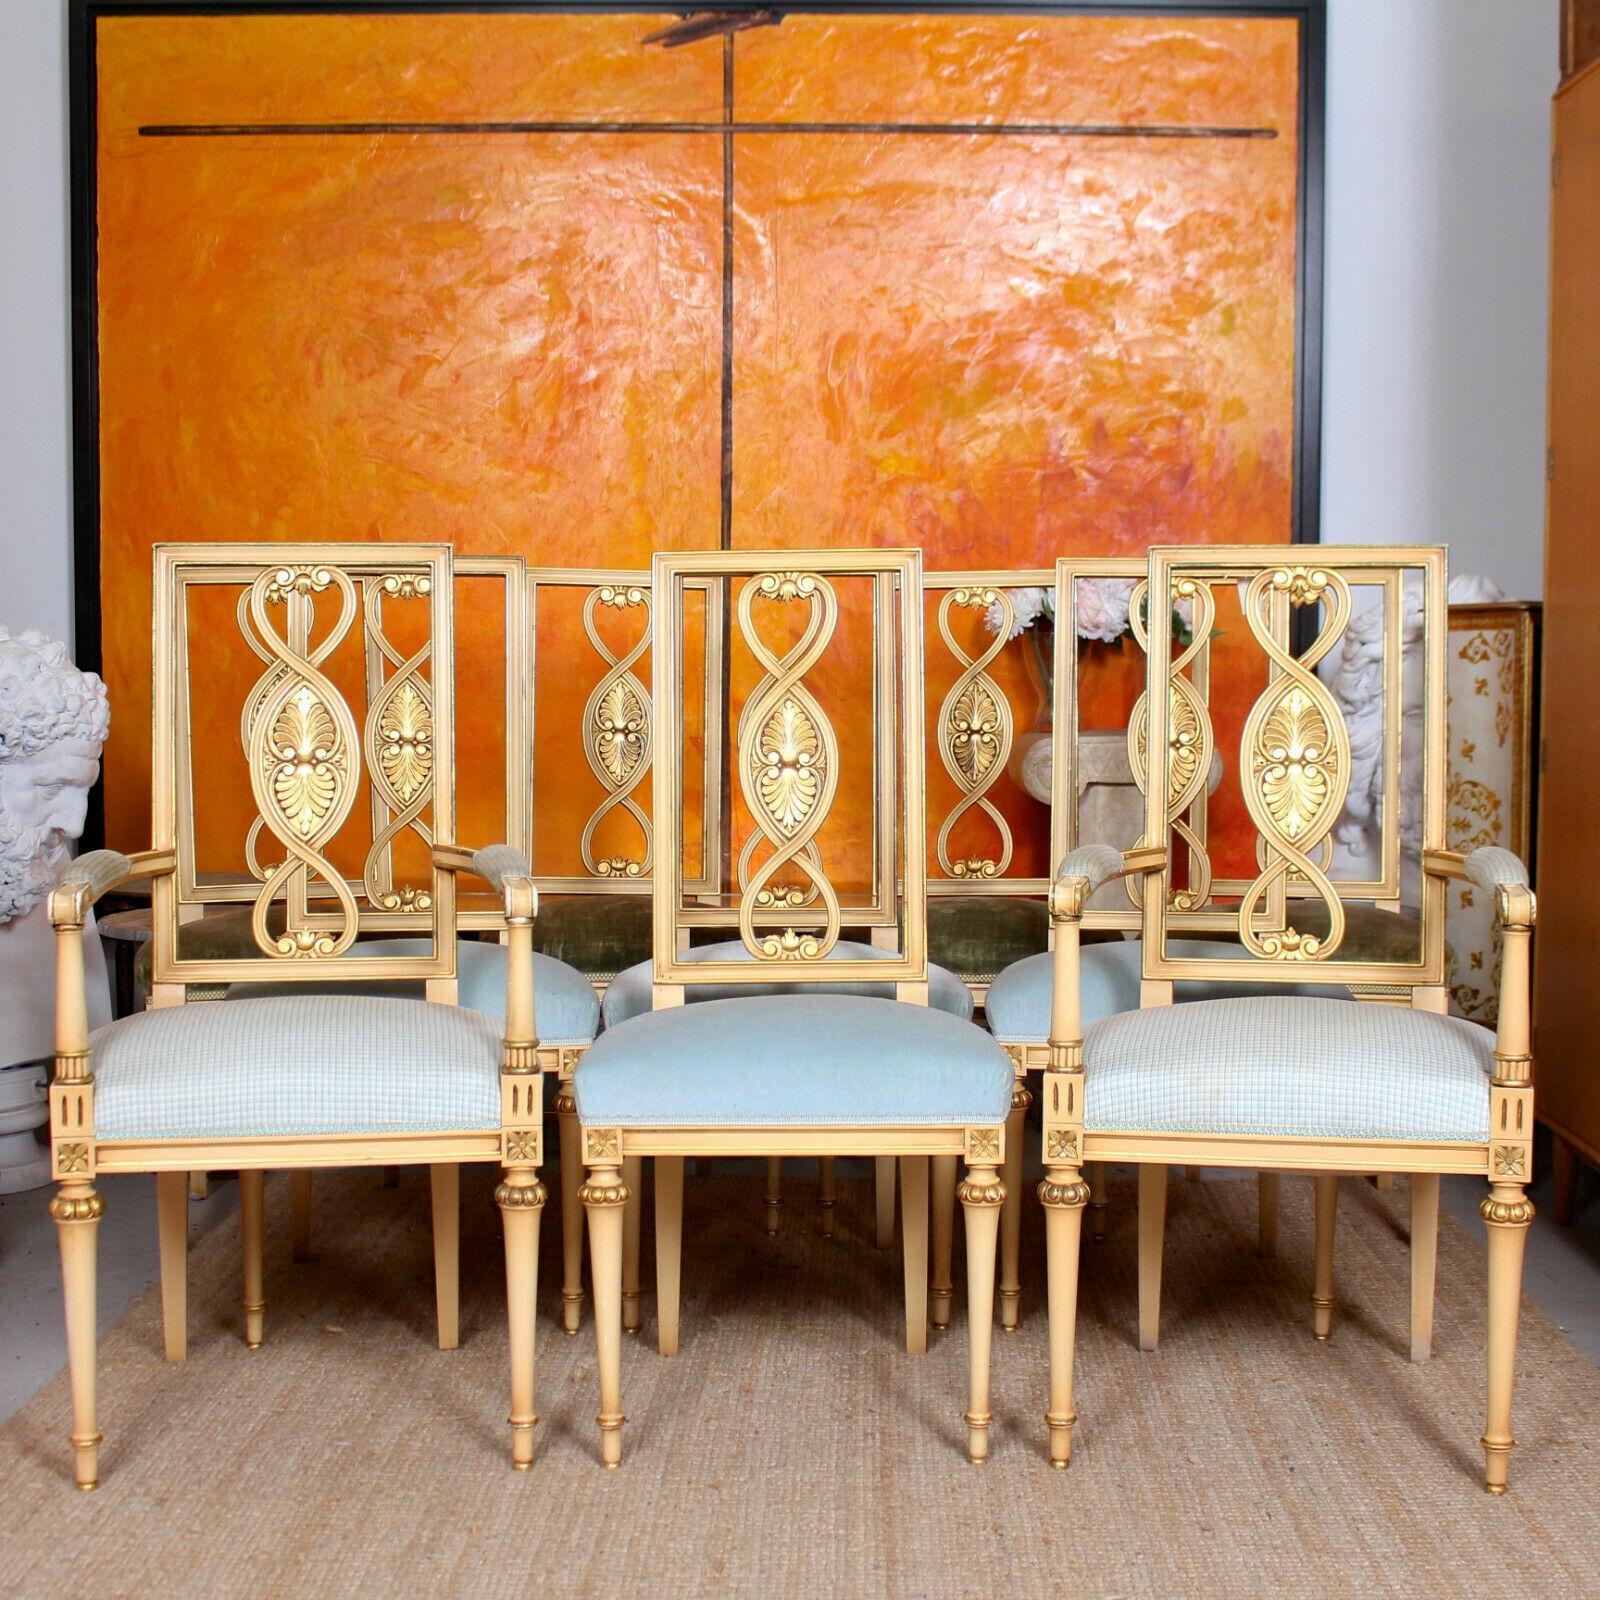 An impressive set of ten early 20th century gilt painted Italian dining chairs originally retailed by Maple & Co.

Offered in good condition though the seats require re-upholstery.

Italy, circa 1920.